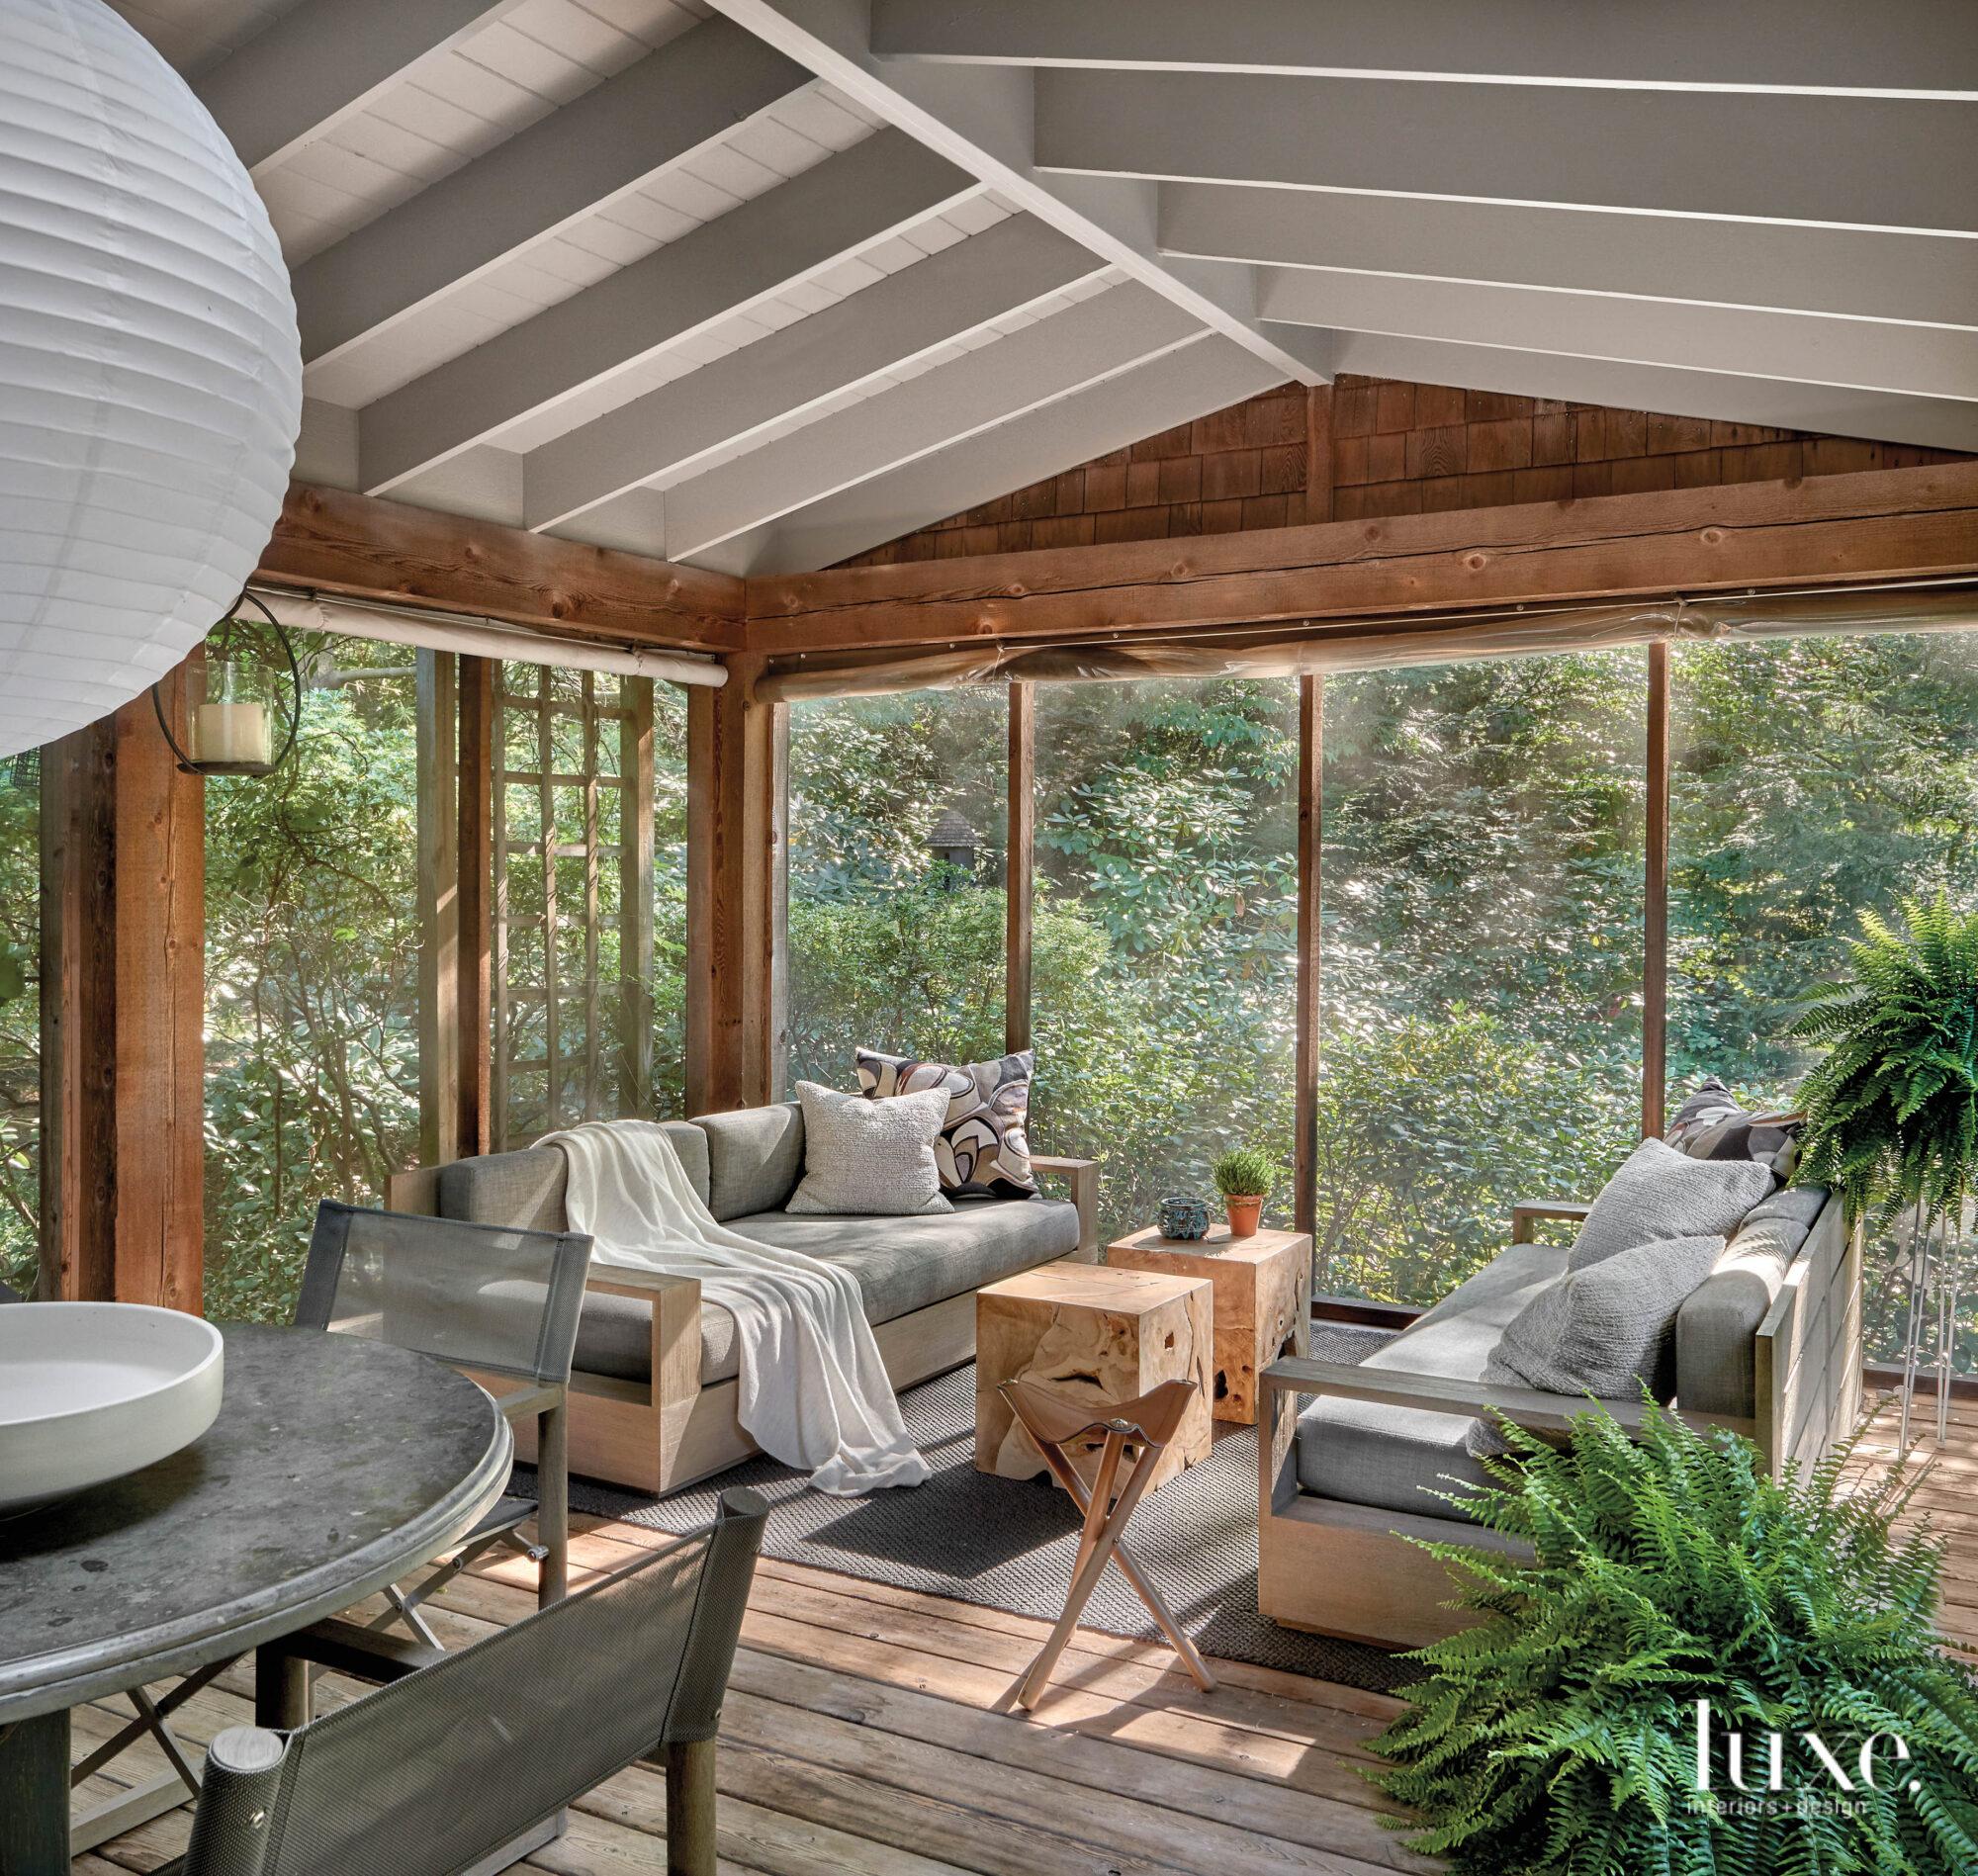 A woodland scenery acts as a perfect backdrop to this rustic yet bright living space.